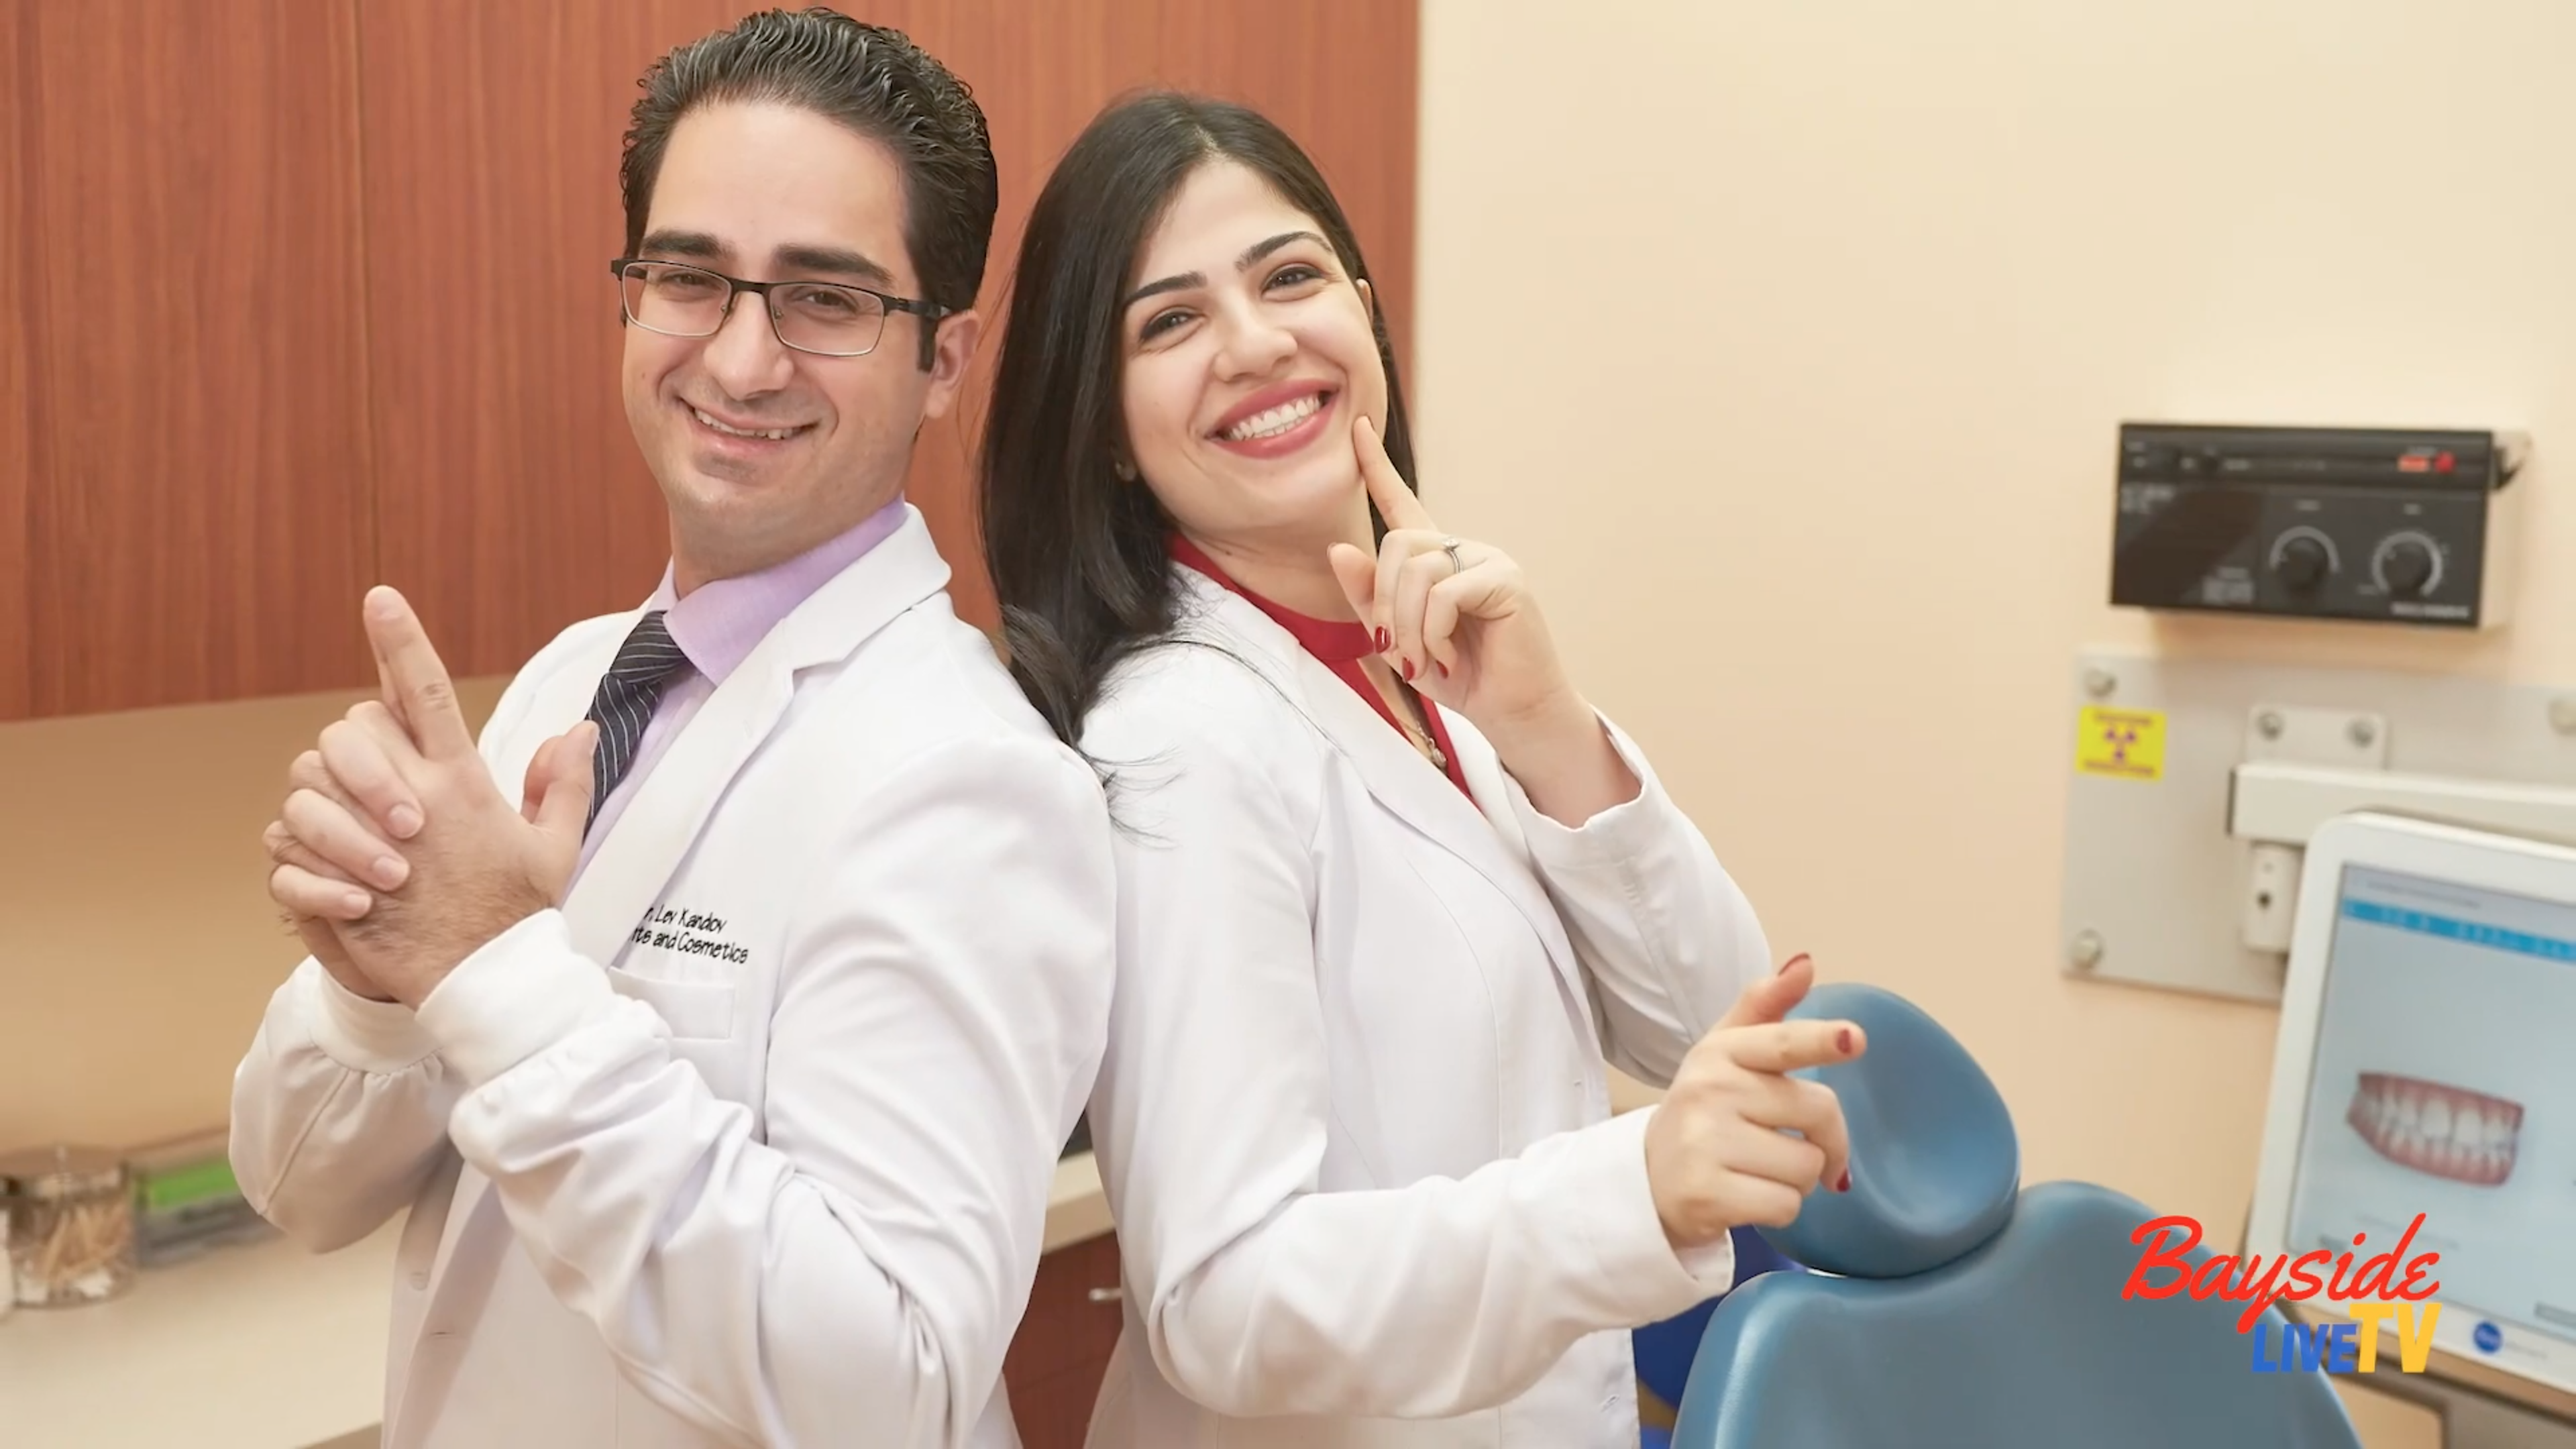 Dr. Lev & Inessa Kandov – A Couple That Will Make You Smile